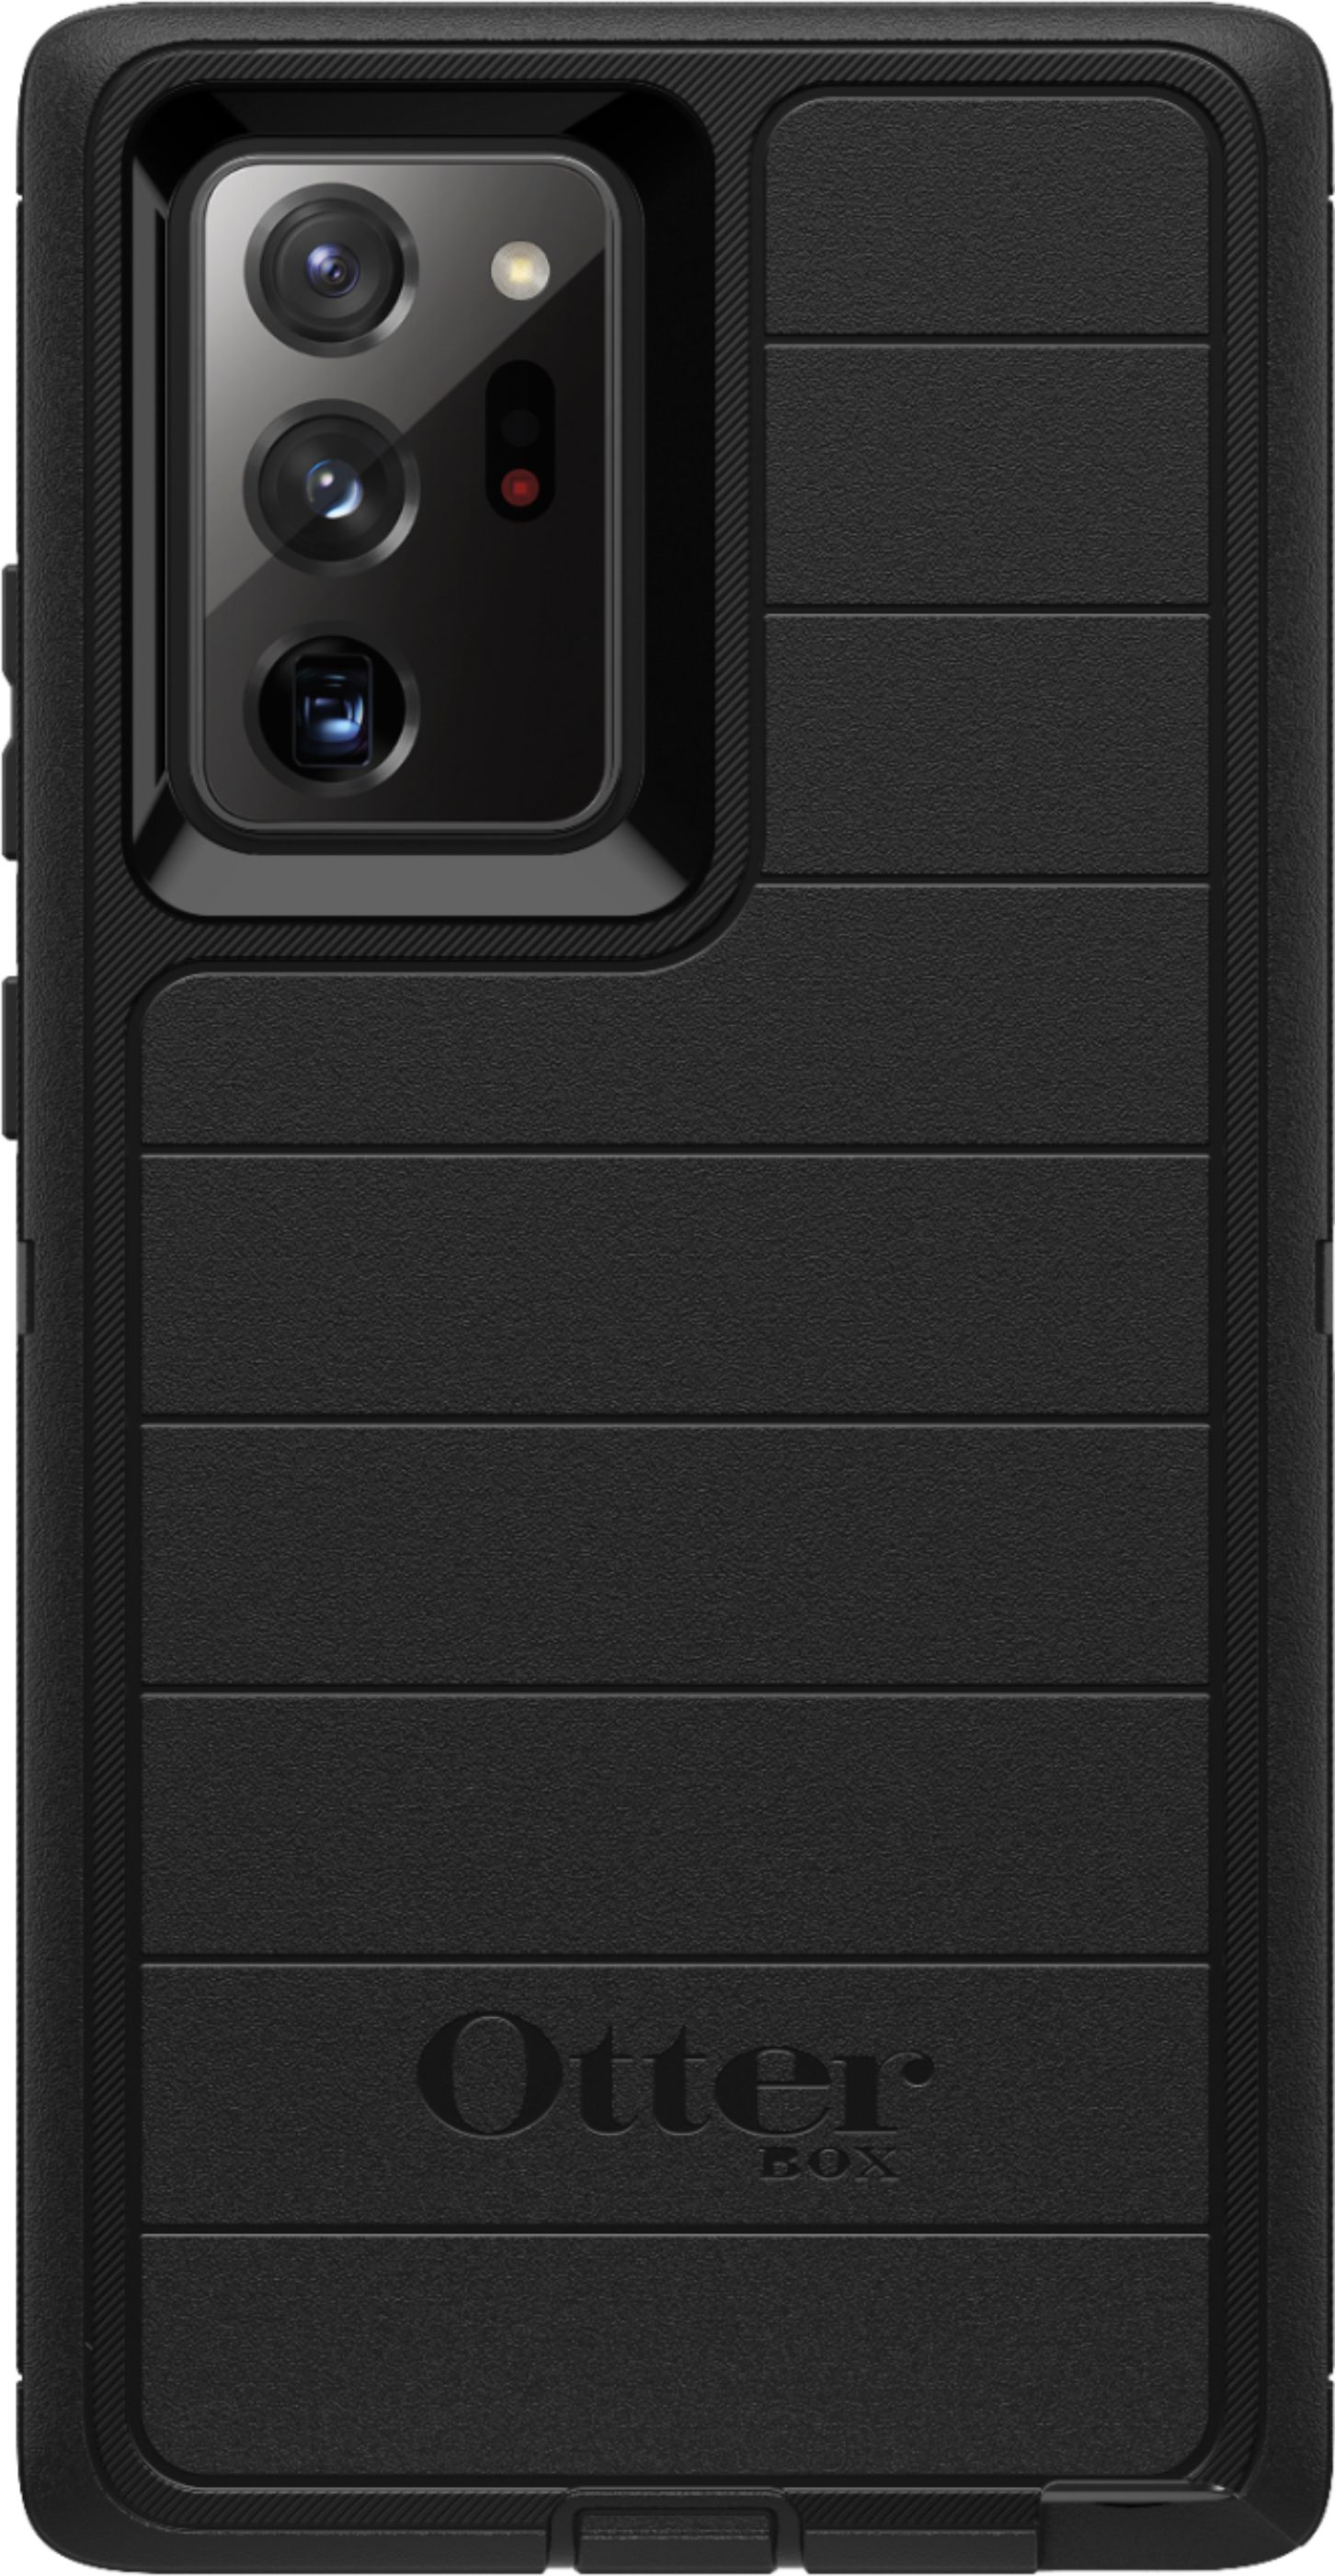 Best Buy: OtterBox Defender Pro Series for Galaxy Note20 Ultra 5G